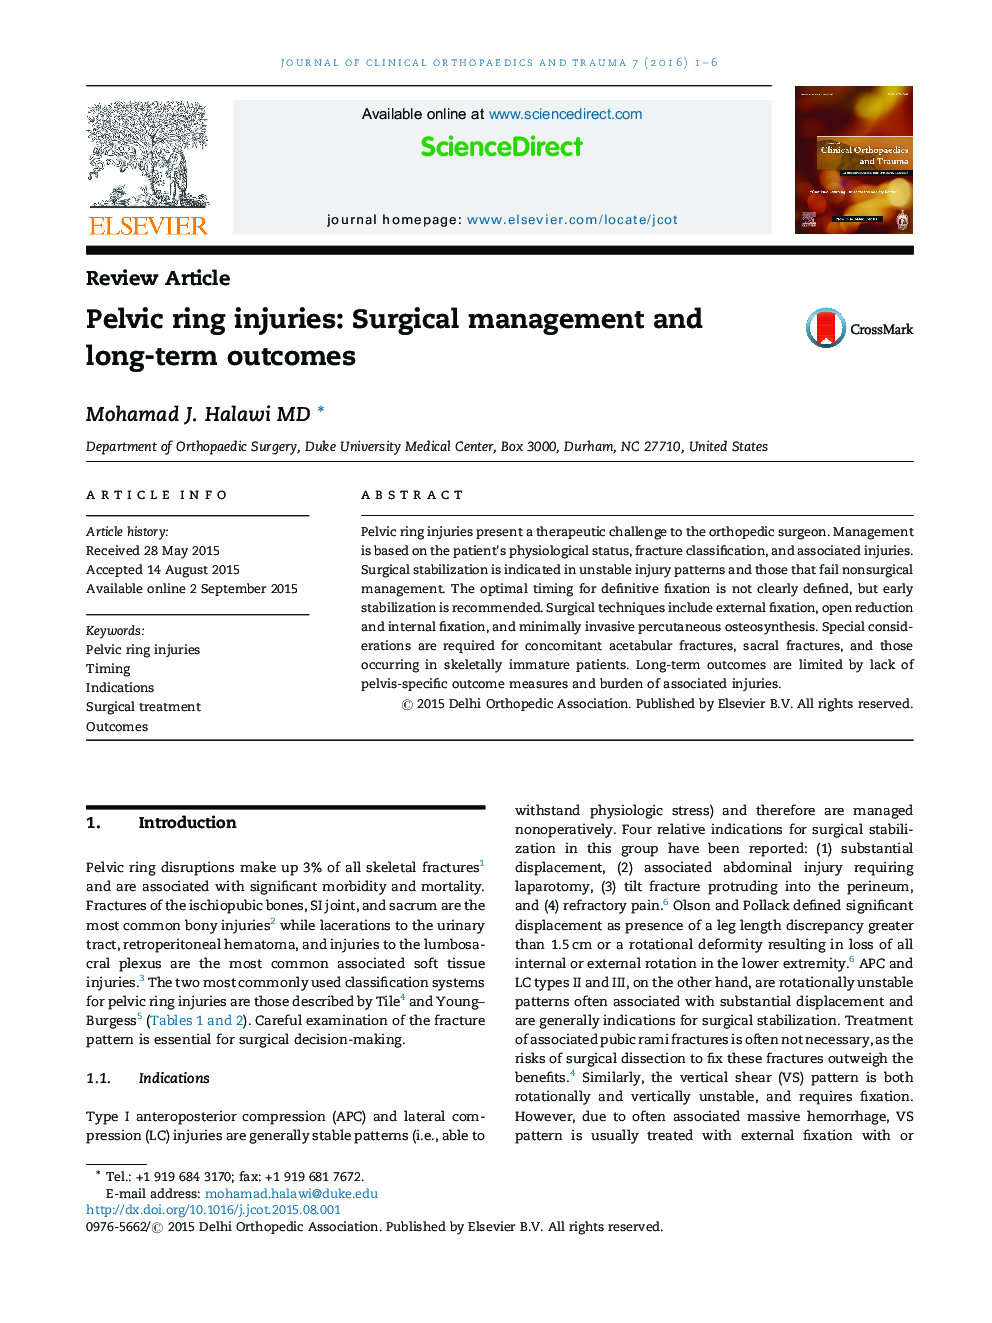 Pelvic ring injuries: Surgical management and long-term outcomes